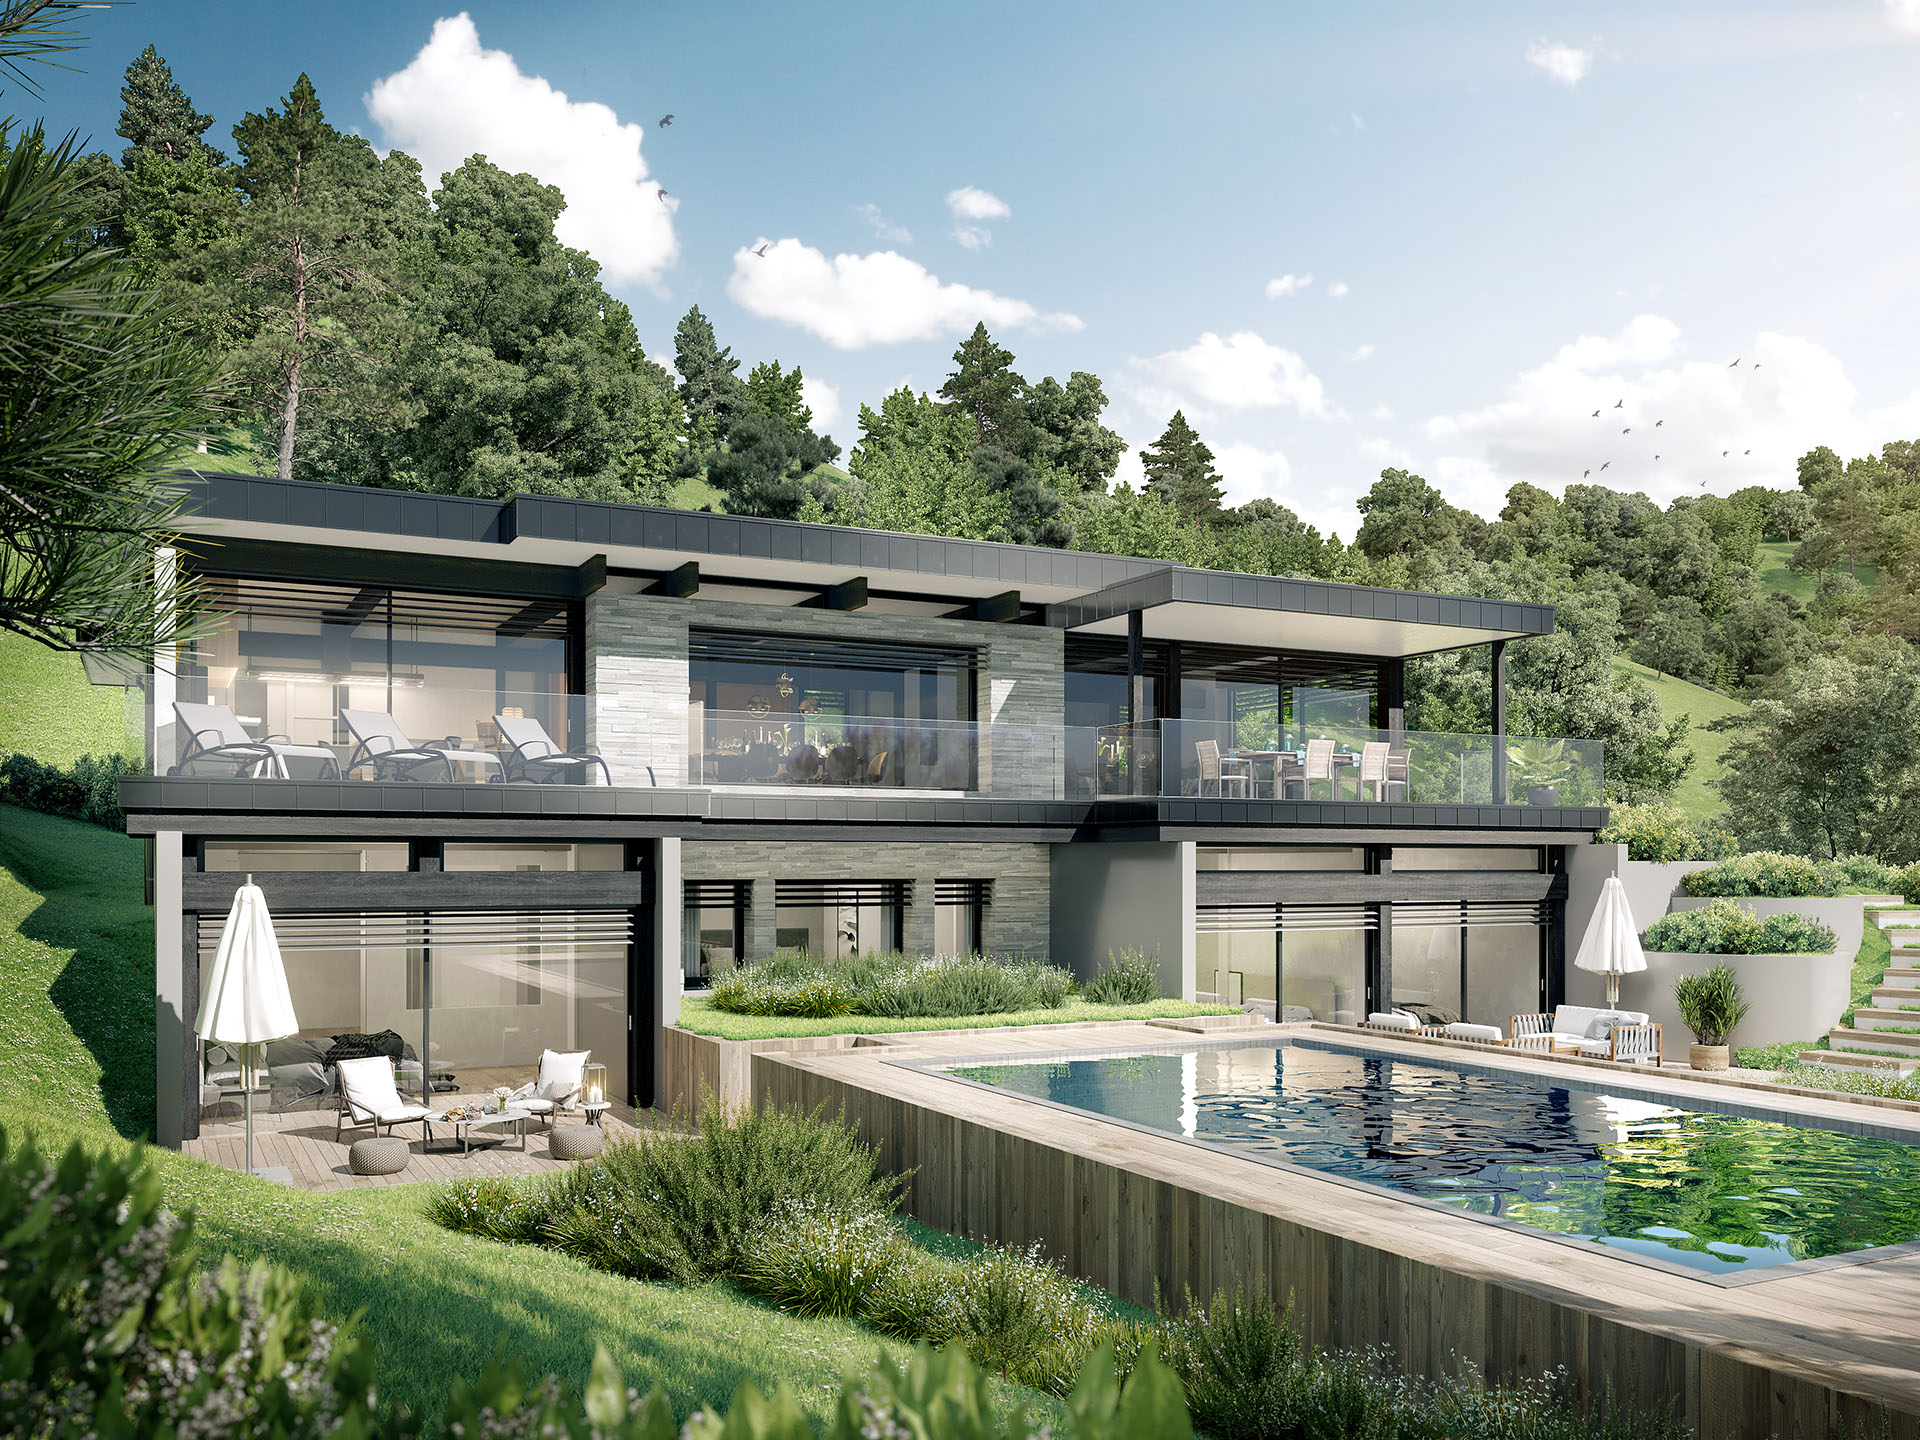 3D view of a modern and luxurious detached house with swimming pool